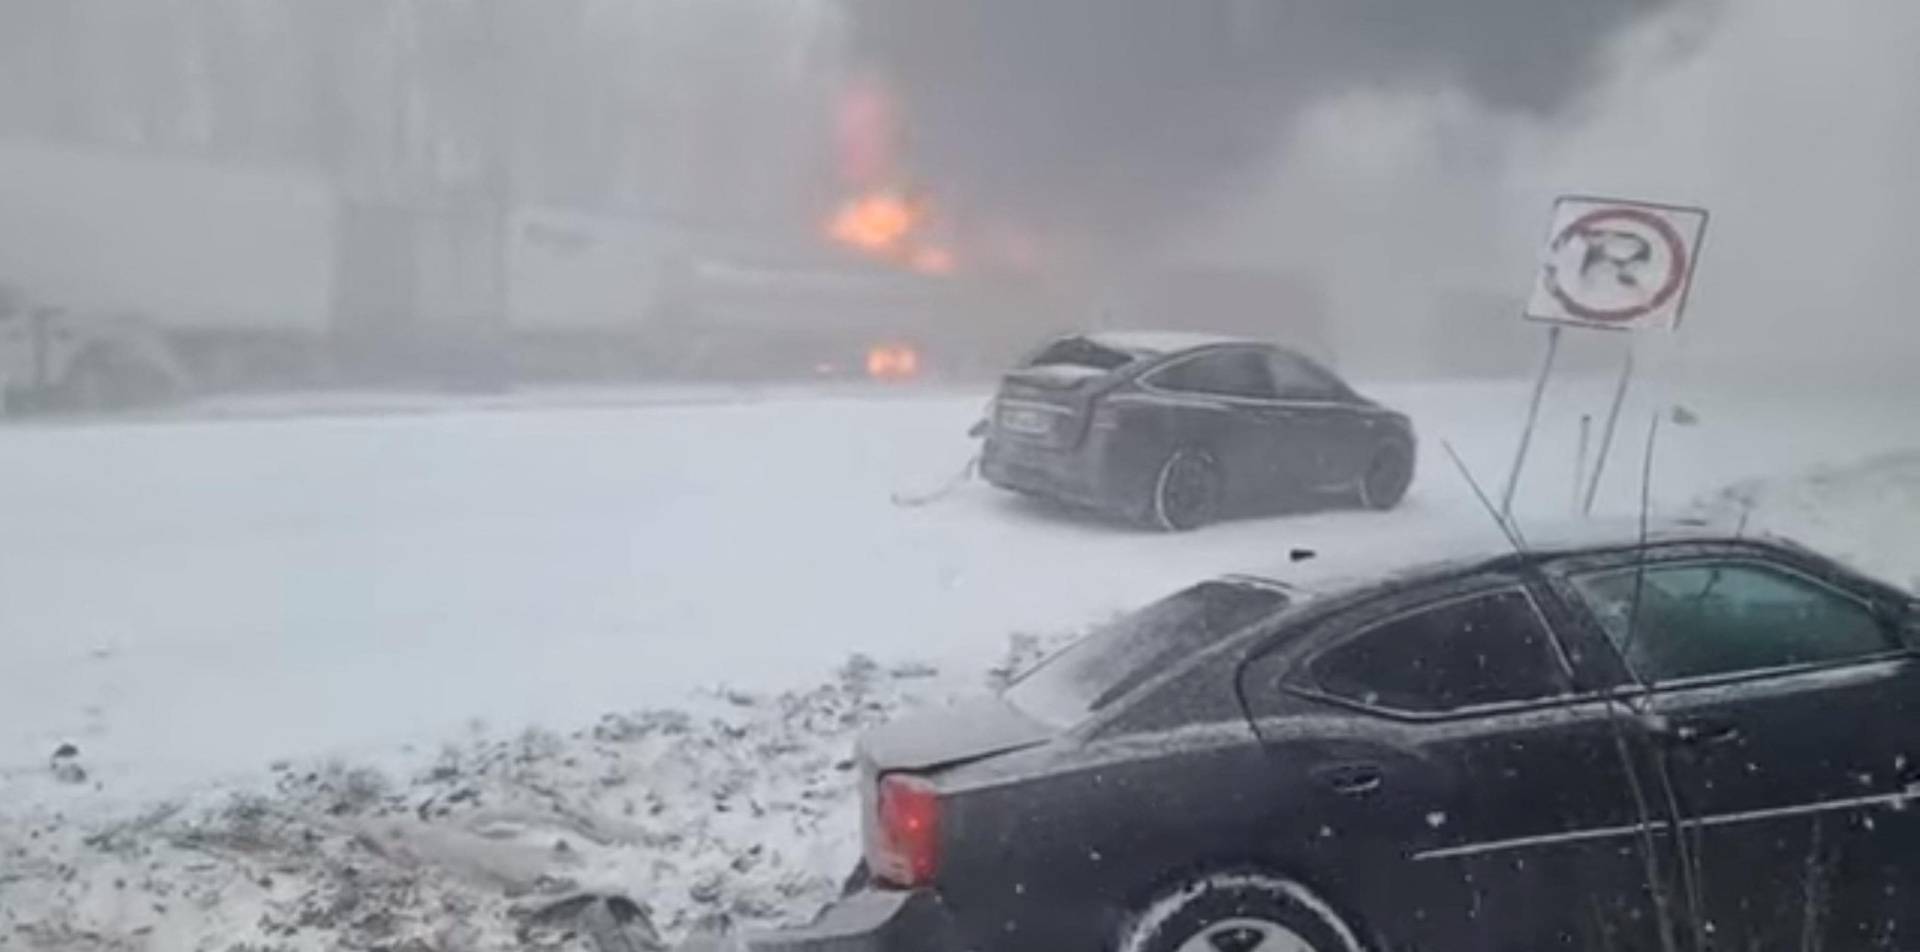 Fiery pileup on Interstate 81 North near 114–116 mile marker in Schuylkill County, Pennsylvania